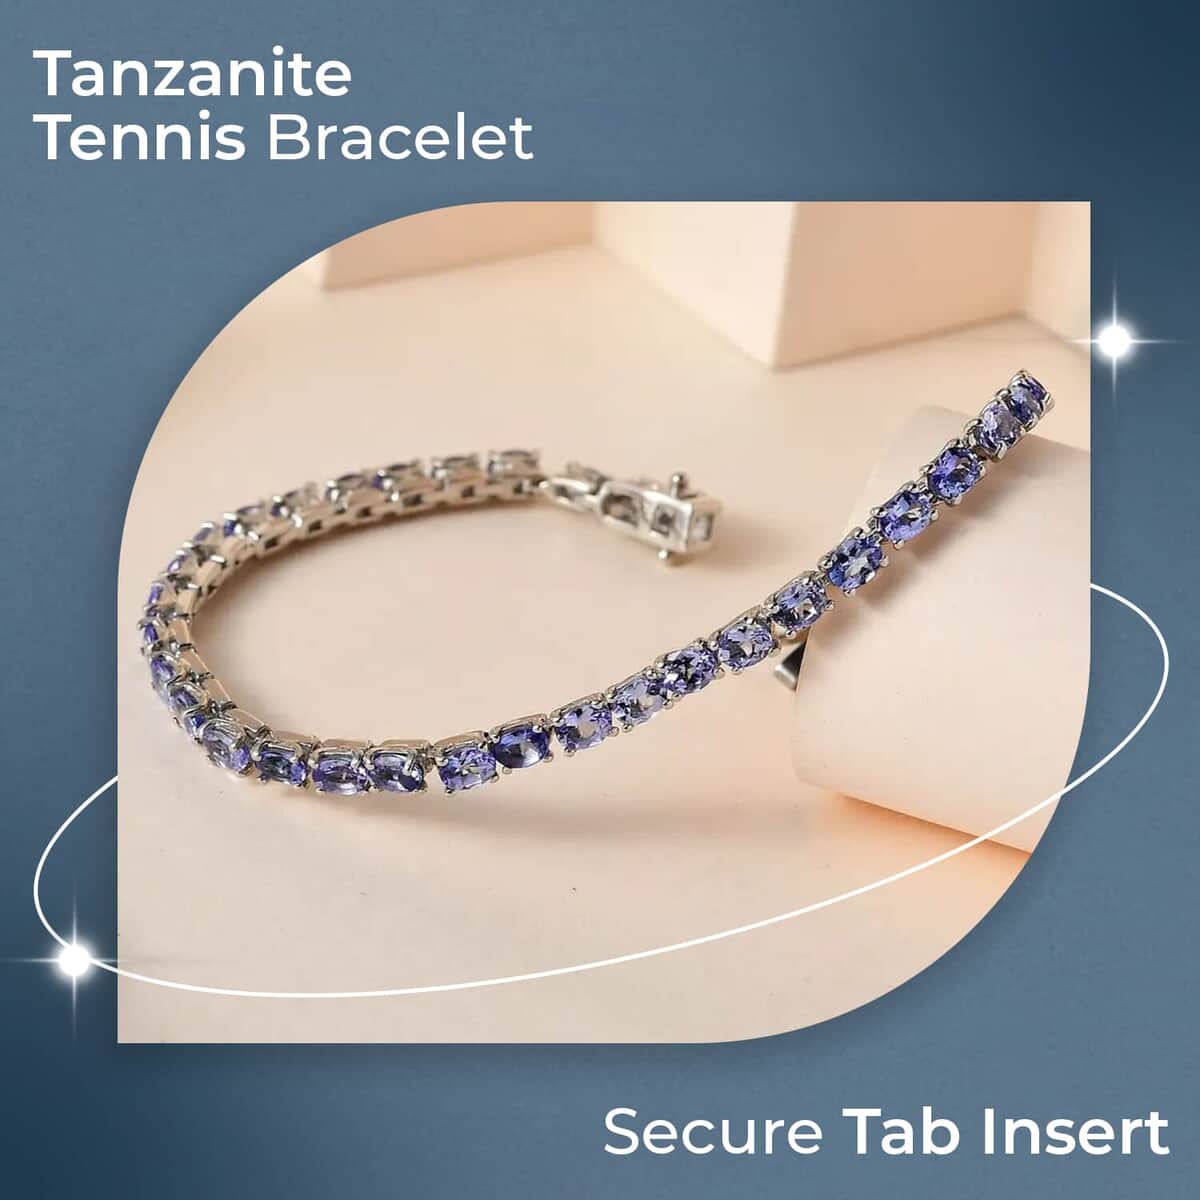 Tanzanite 8.15 ctw Tennis Bracelet, Platinum Over Sterling Silver Bracelet, Tanzanite Jewelry, Gifts For Her (7.25 In) image number 1